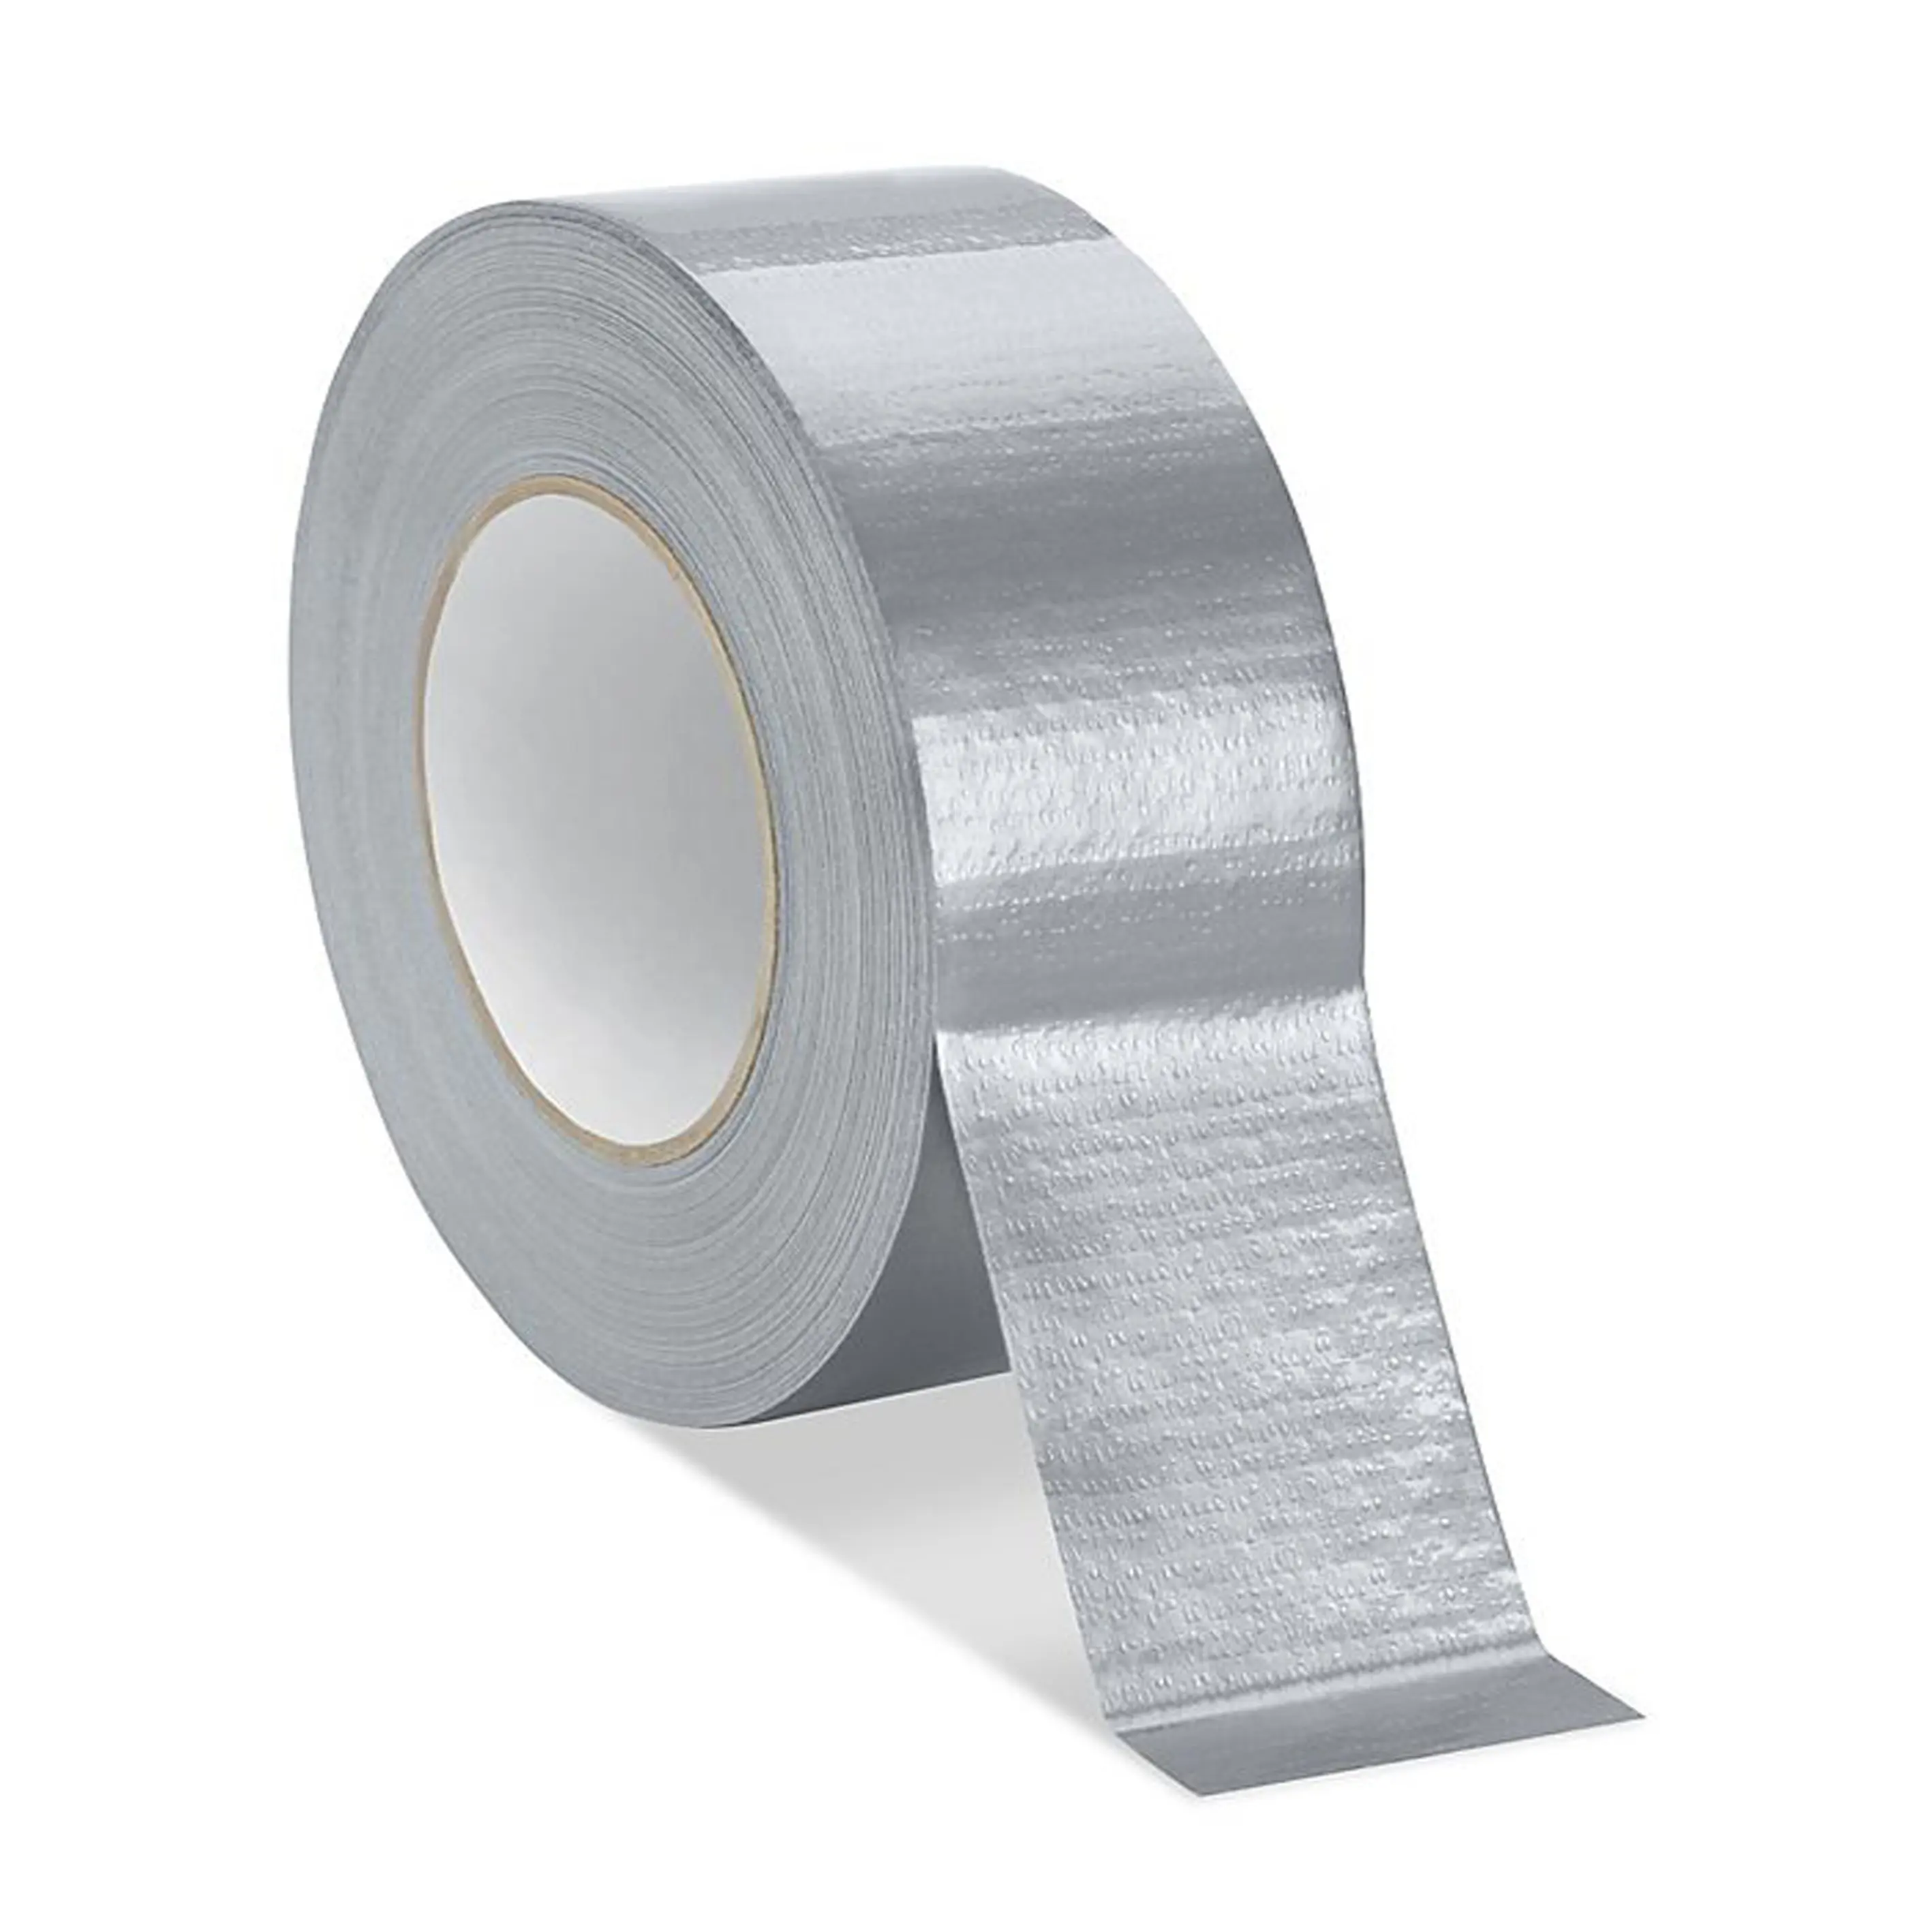 Rubber glue Heavy Duty Waterproof Branded strong Adhesive Silver Fabric Floor Cloth Duct Tape